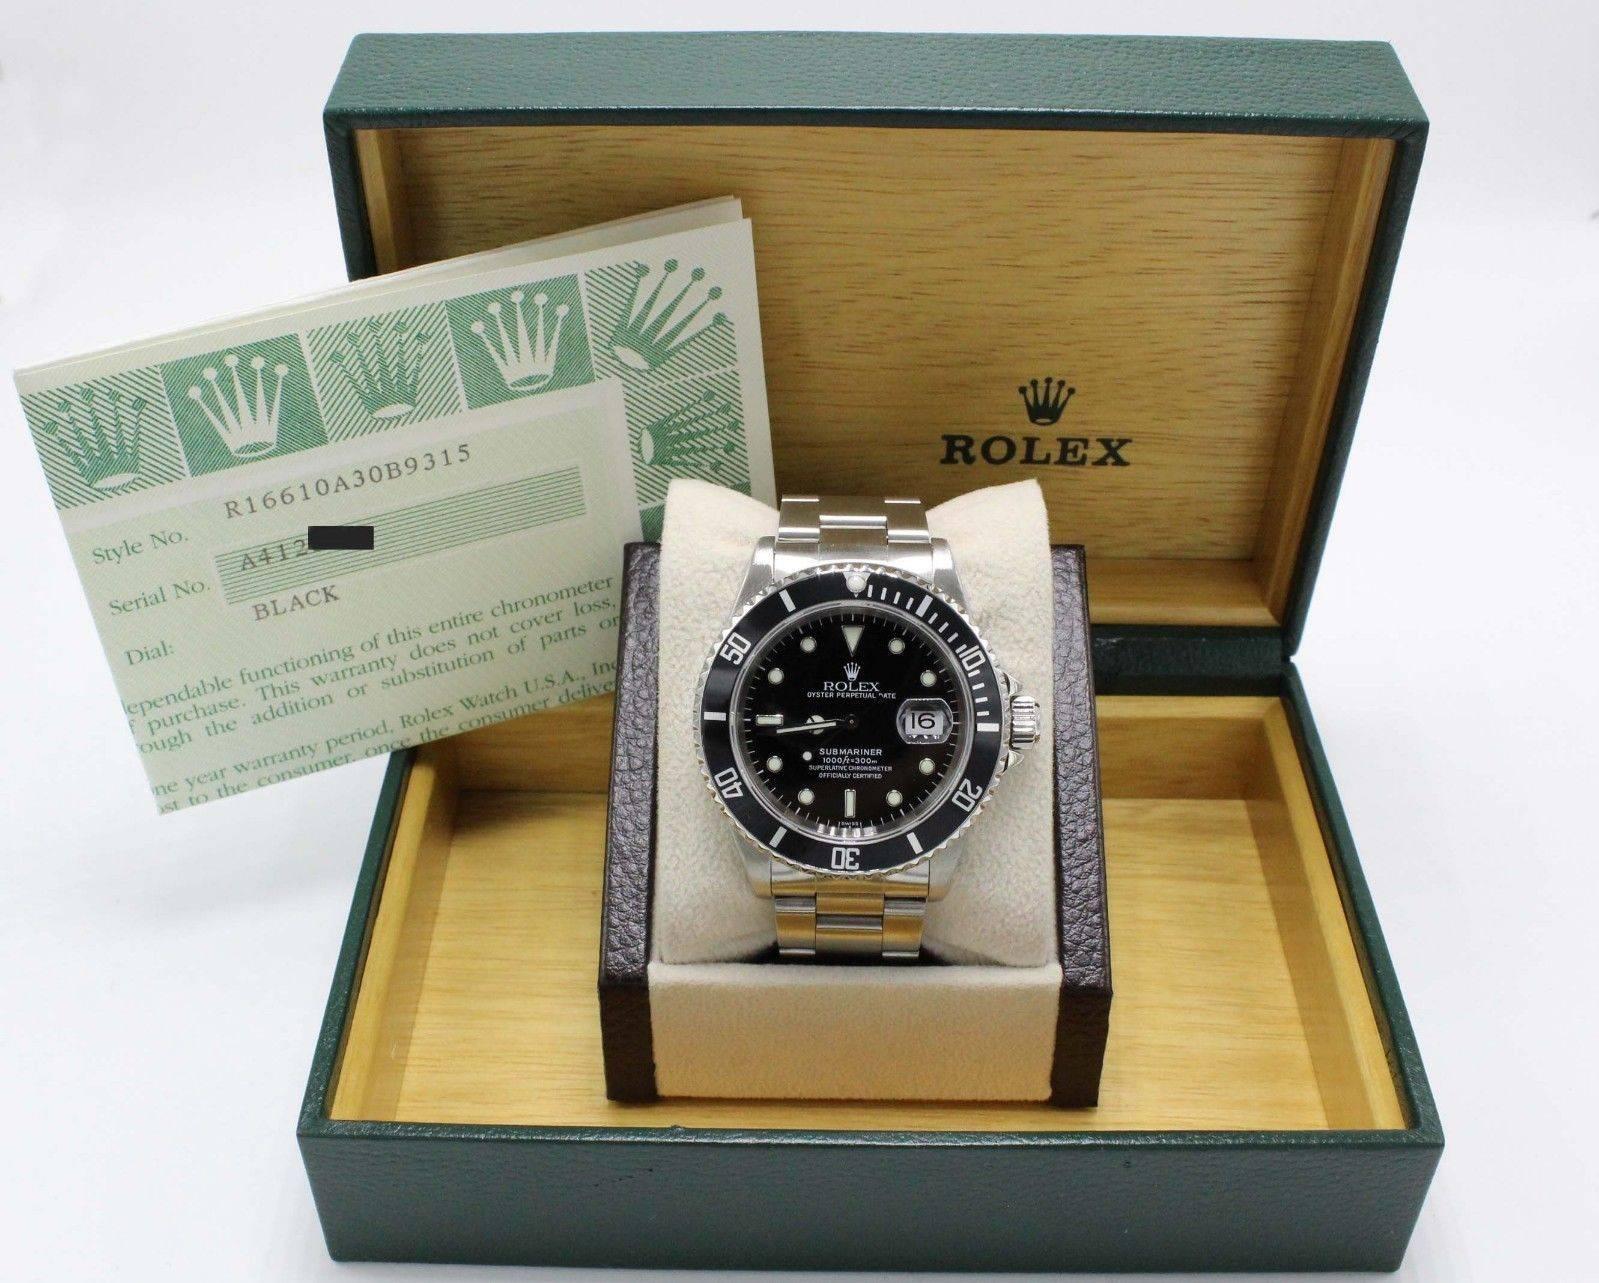 Rolex Submariner Oyster Date 16610 Black Dial Stainless Steel 2